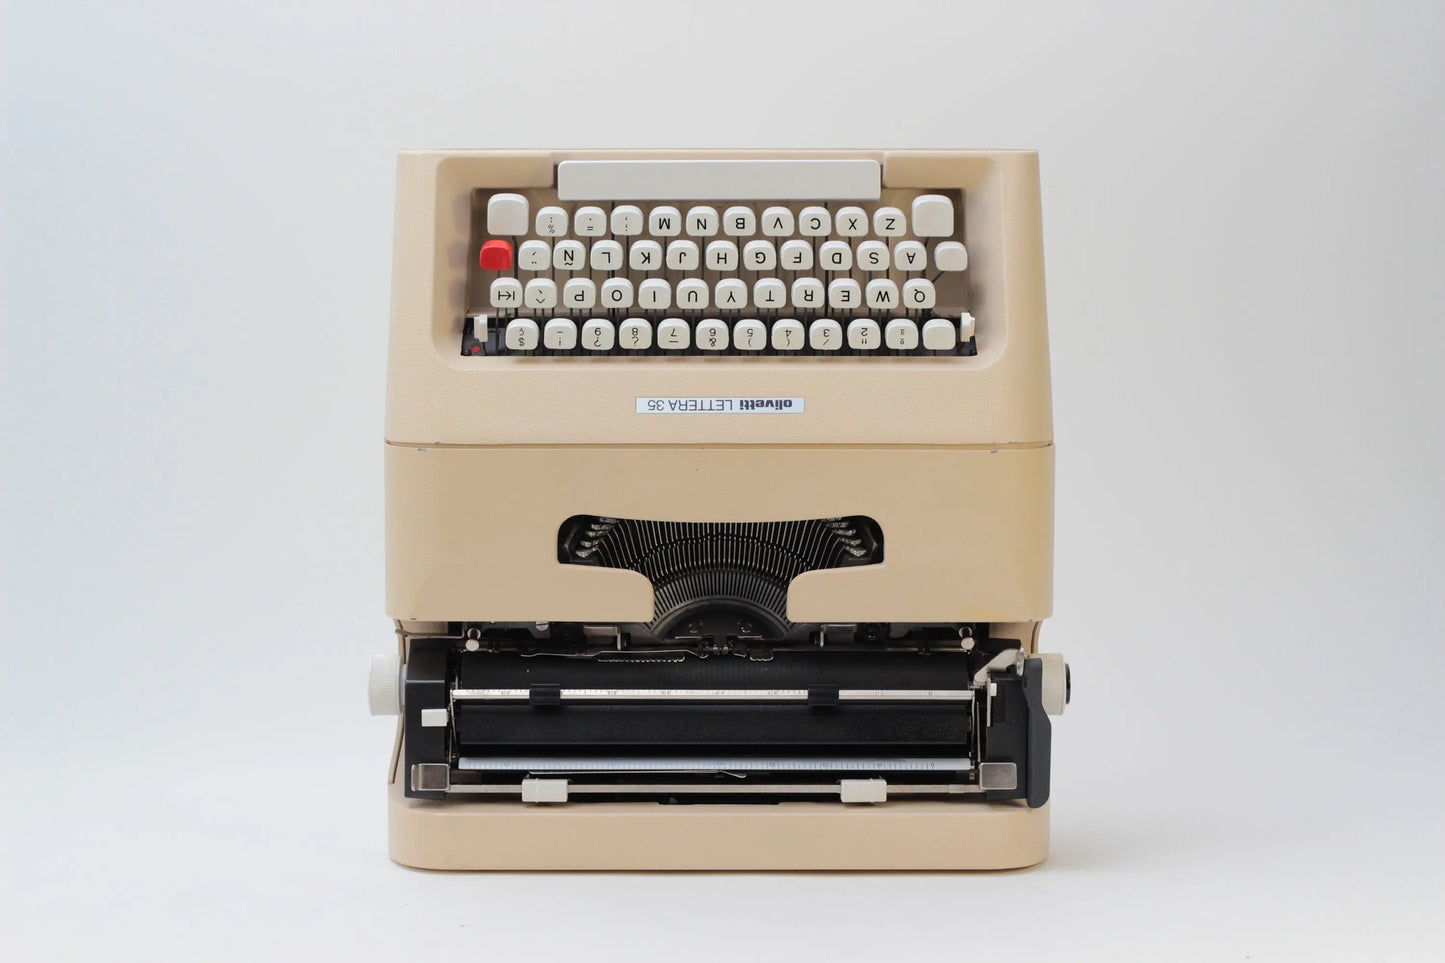 Olivetti Lettera 35 Beige Typewriter, Vintage, Mint Condition, Manual Portable, Professionally Serviced by Typewriter.Company - ElGranero Typewriter.Company